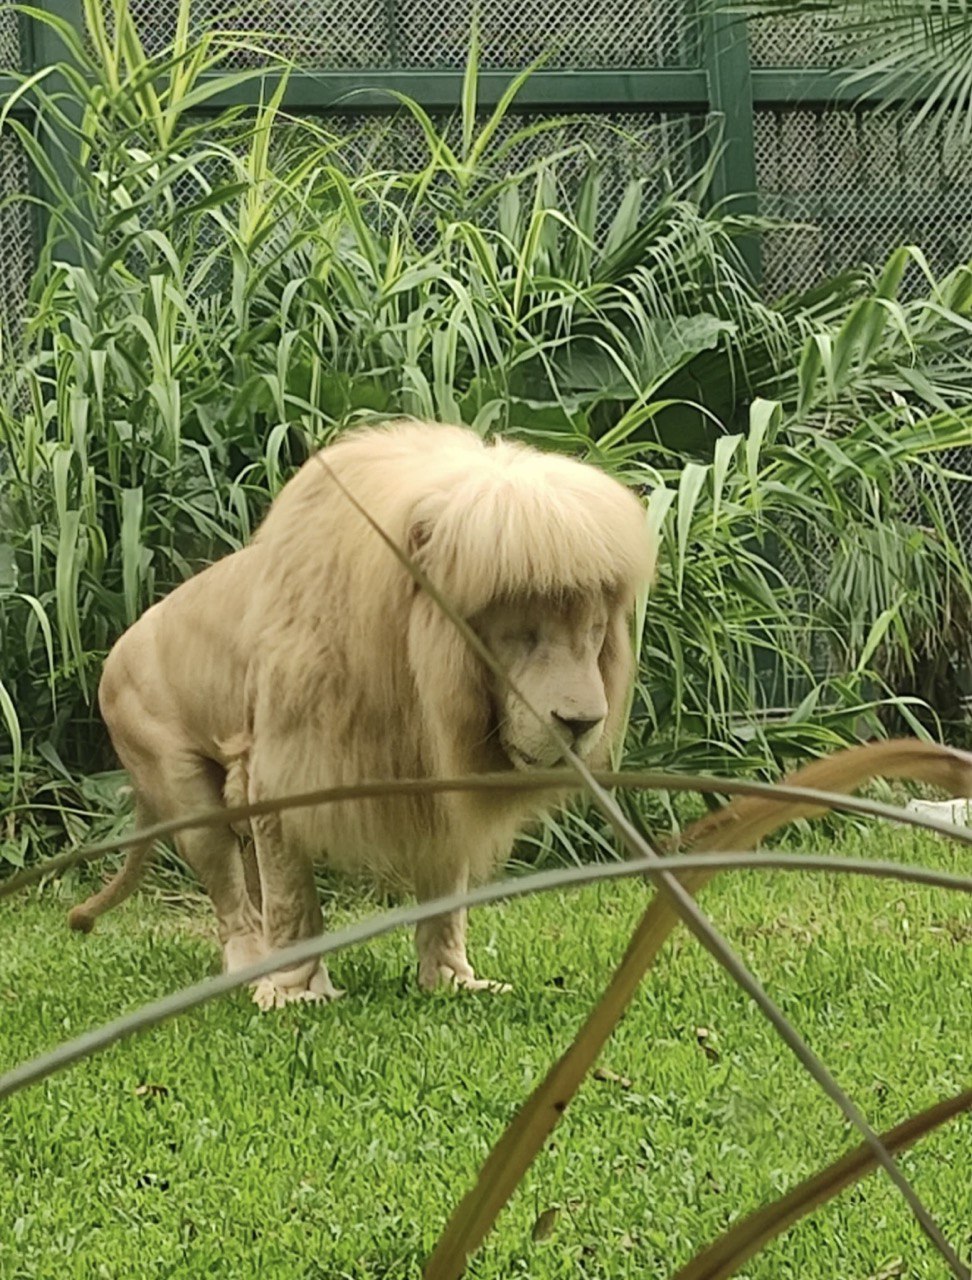 Lion in China zoo goes viral for fringe, zookeepers deny giving it haircut  - Mothership.SG - News from Singapore, Asia and around the world